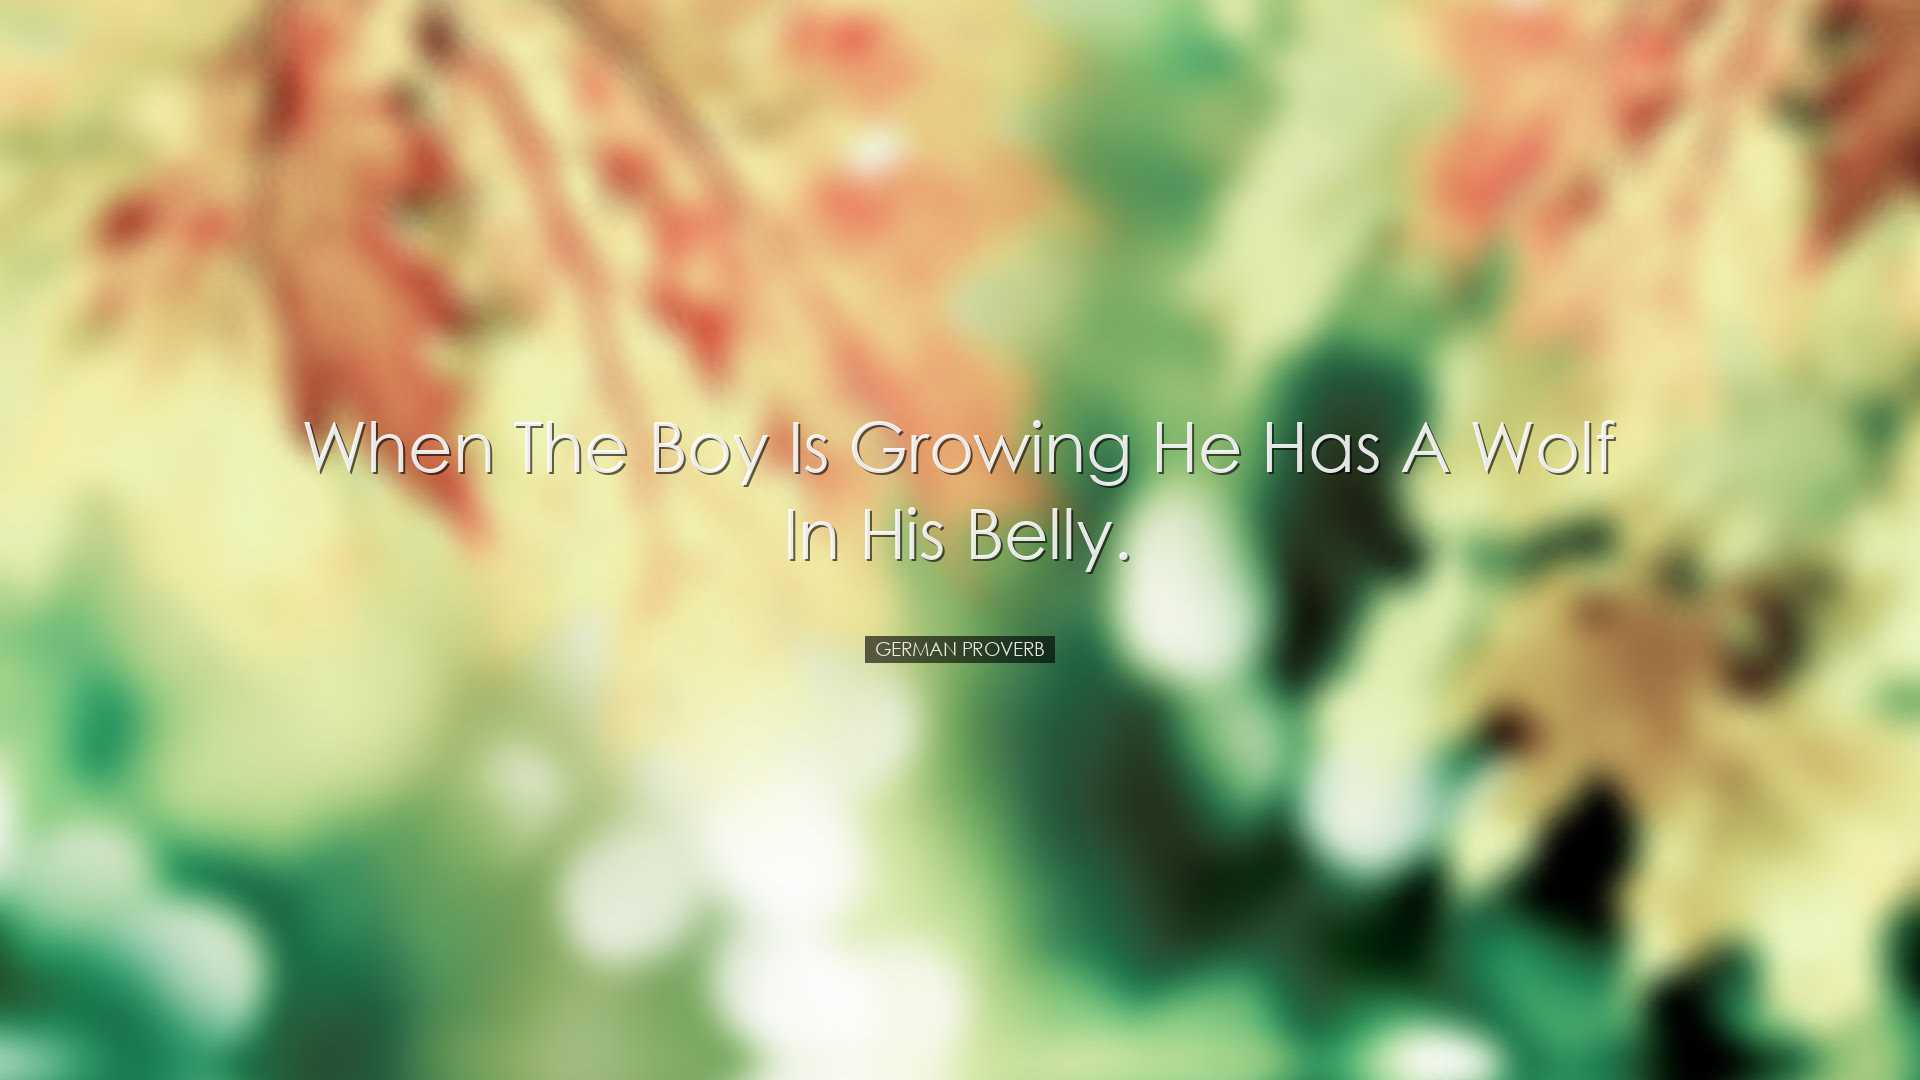 When the boy is growing he has a wolf in his belly. - German Prove